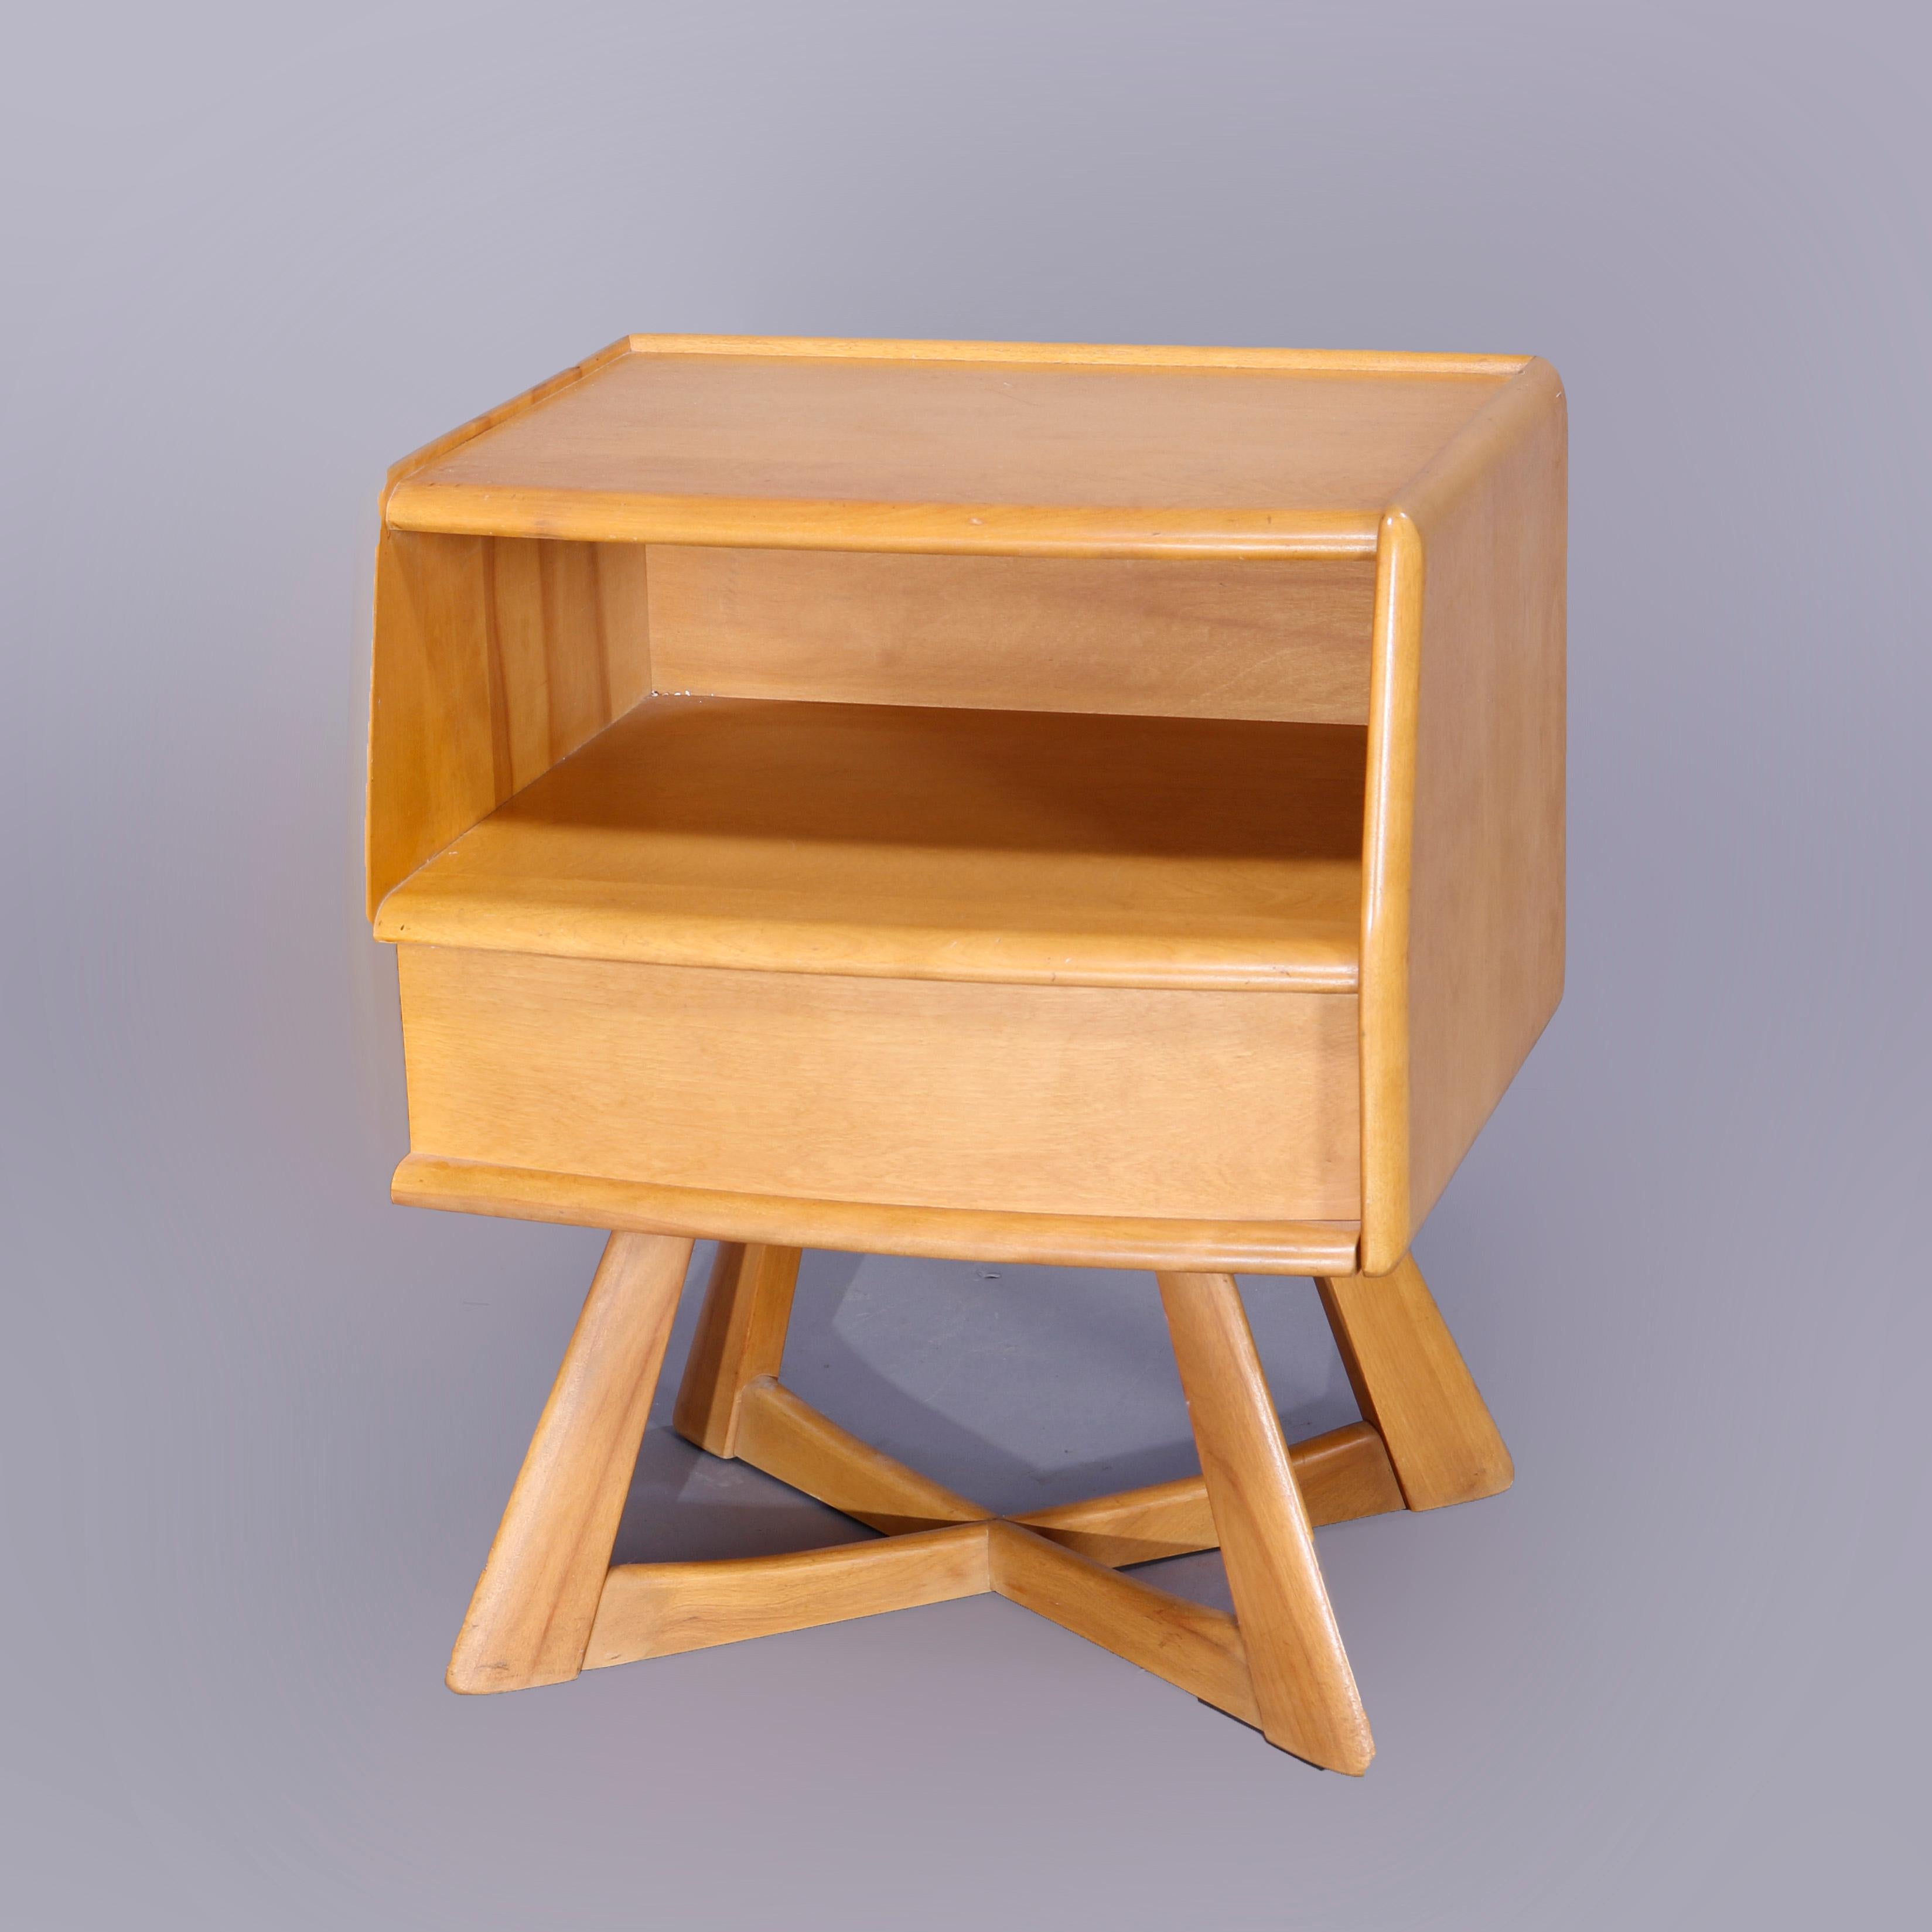 A Mid-Century Modern Heywood Wakefield side stand in the Sculptura pattern offers birch construction with case having open shelf over single drawer, raised on geometric open legs, Wheat finish, c1950

Measures- 24'' H x 20'' W x 16.5'' D.